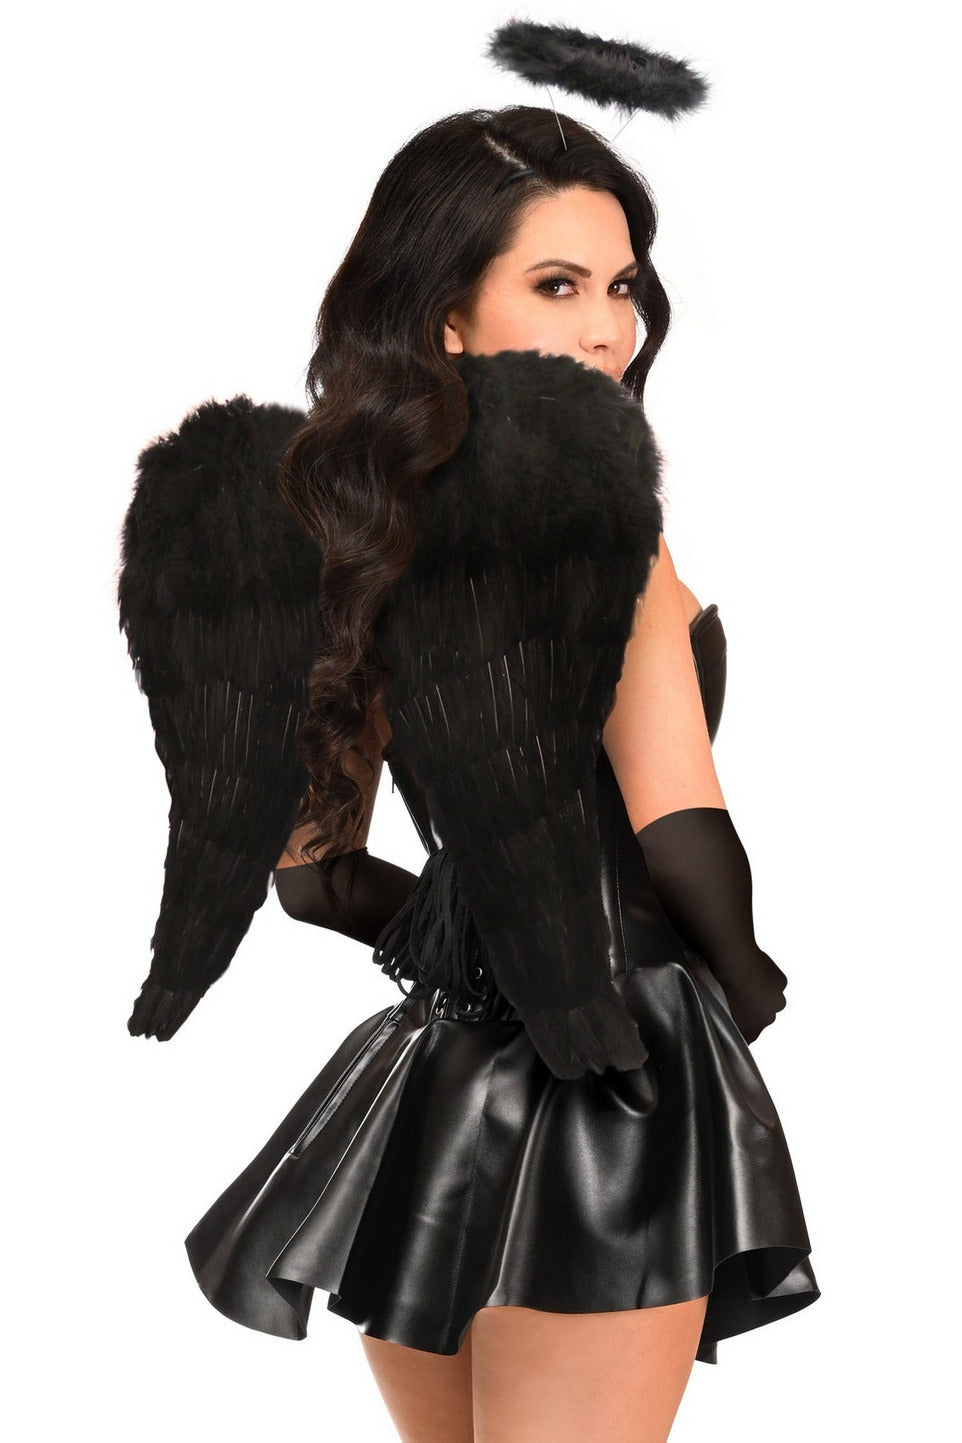 Daisy Corsets Top Drawer 4 PC Faux Leather Dark Angel Corset Dress Costume